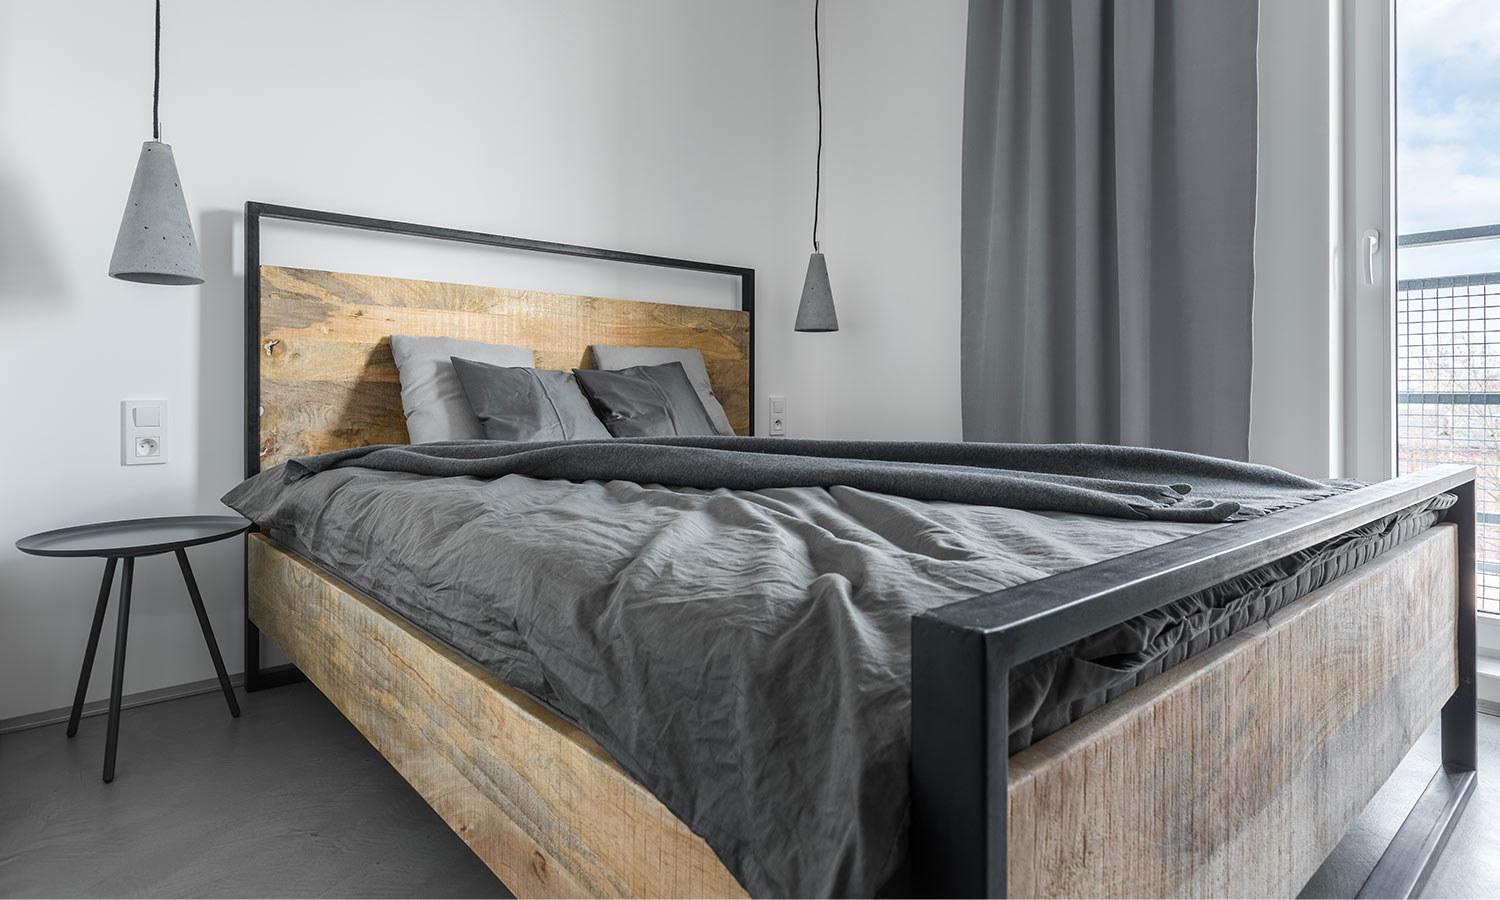 A bedframe composed of rustic wood and metal.